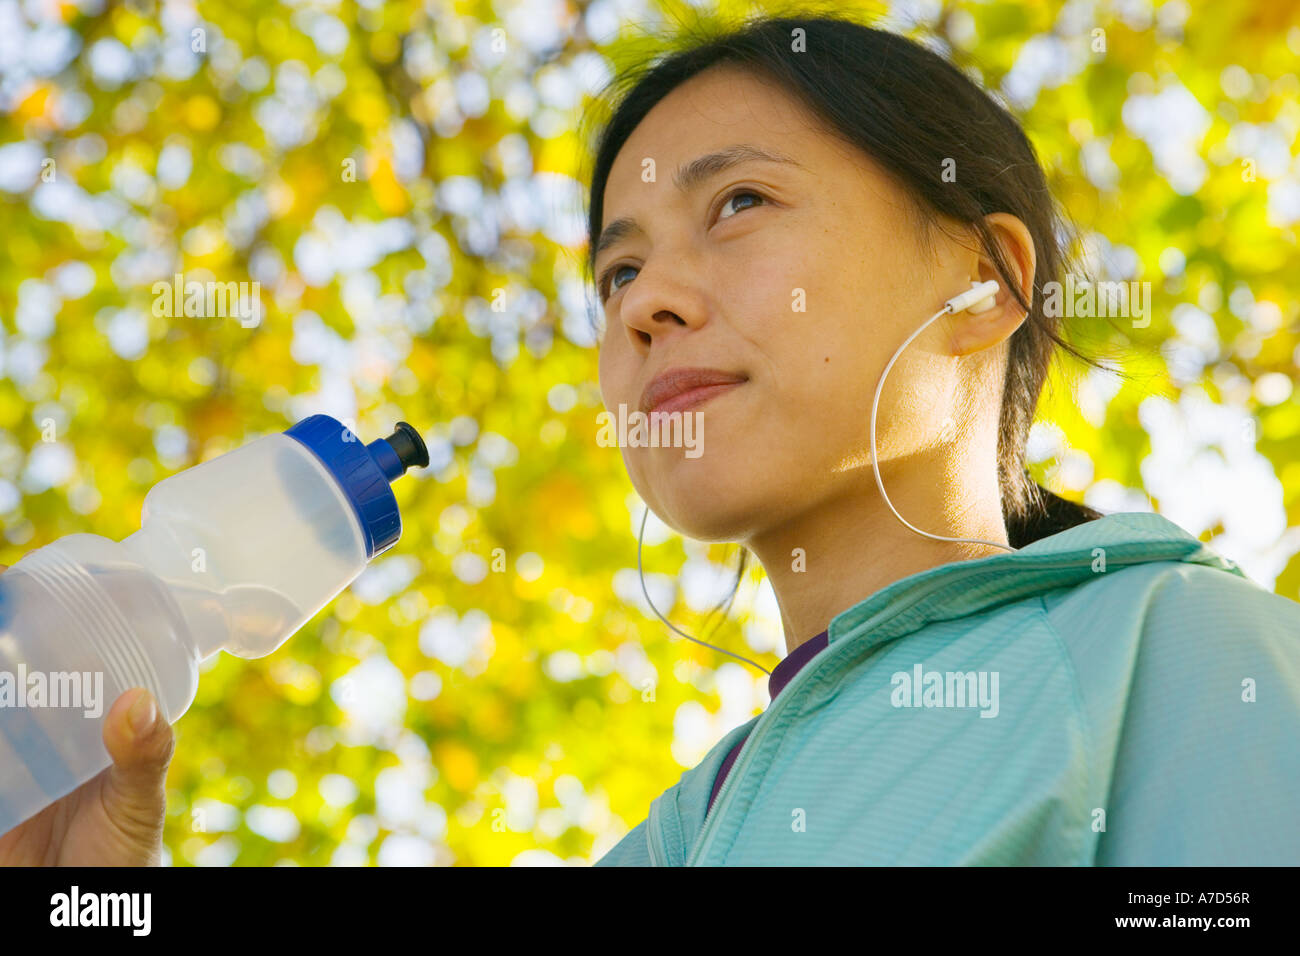 Young female with water bottle and MP3 player Stock Photo